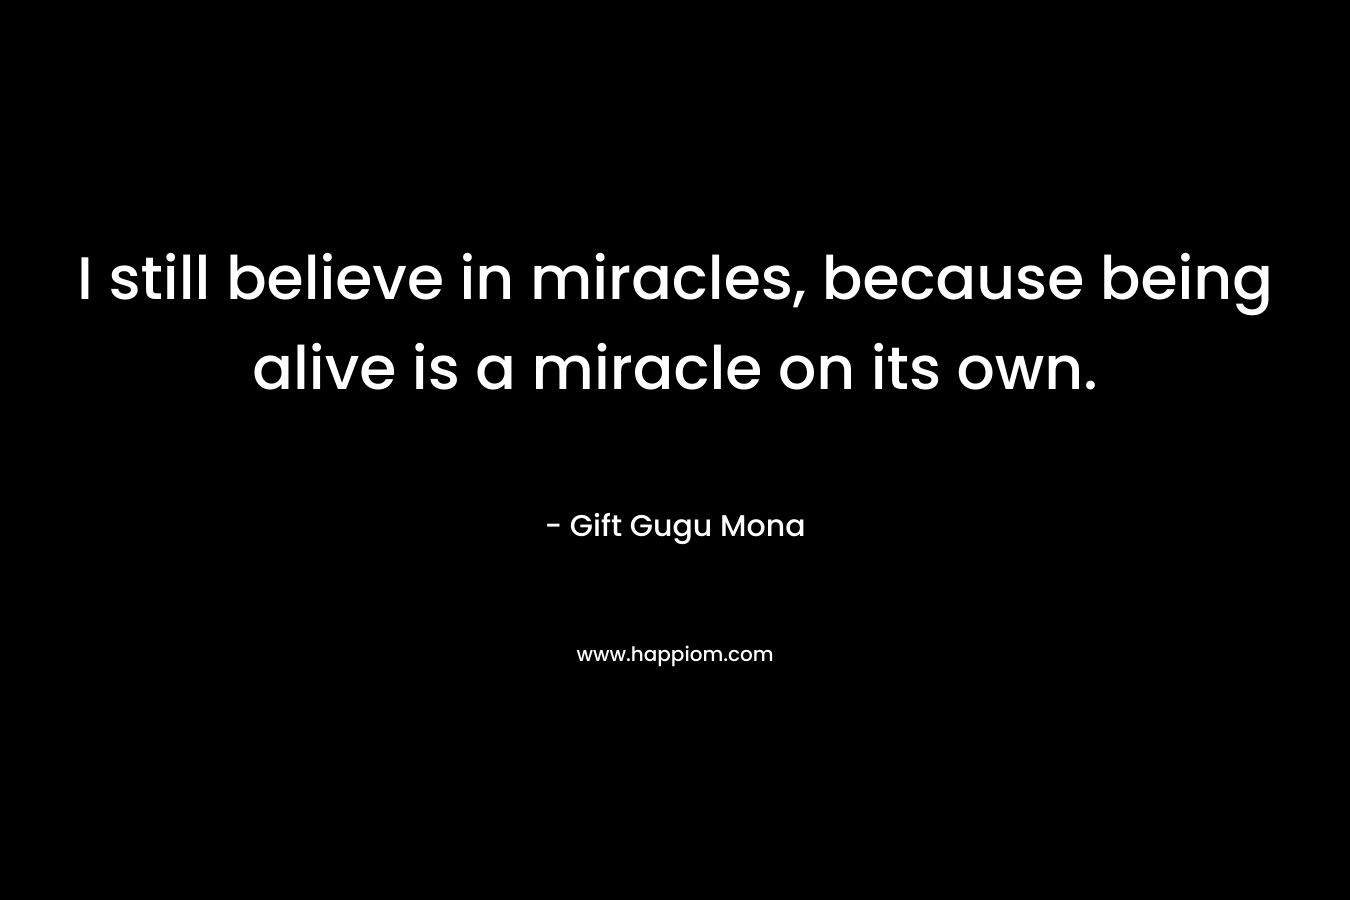 I still believe in miracles, because being alive is a miracle on its own.